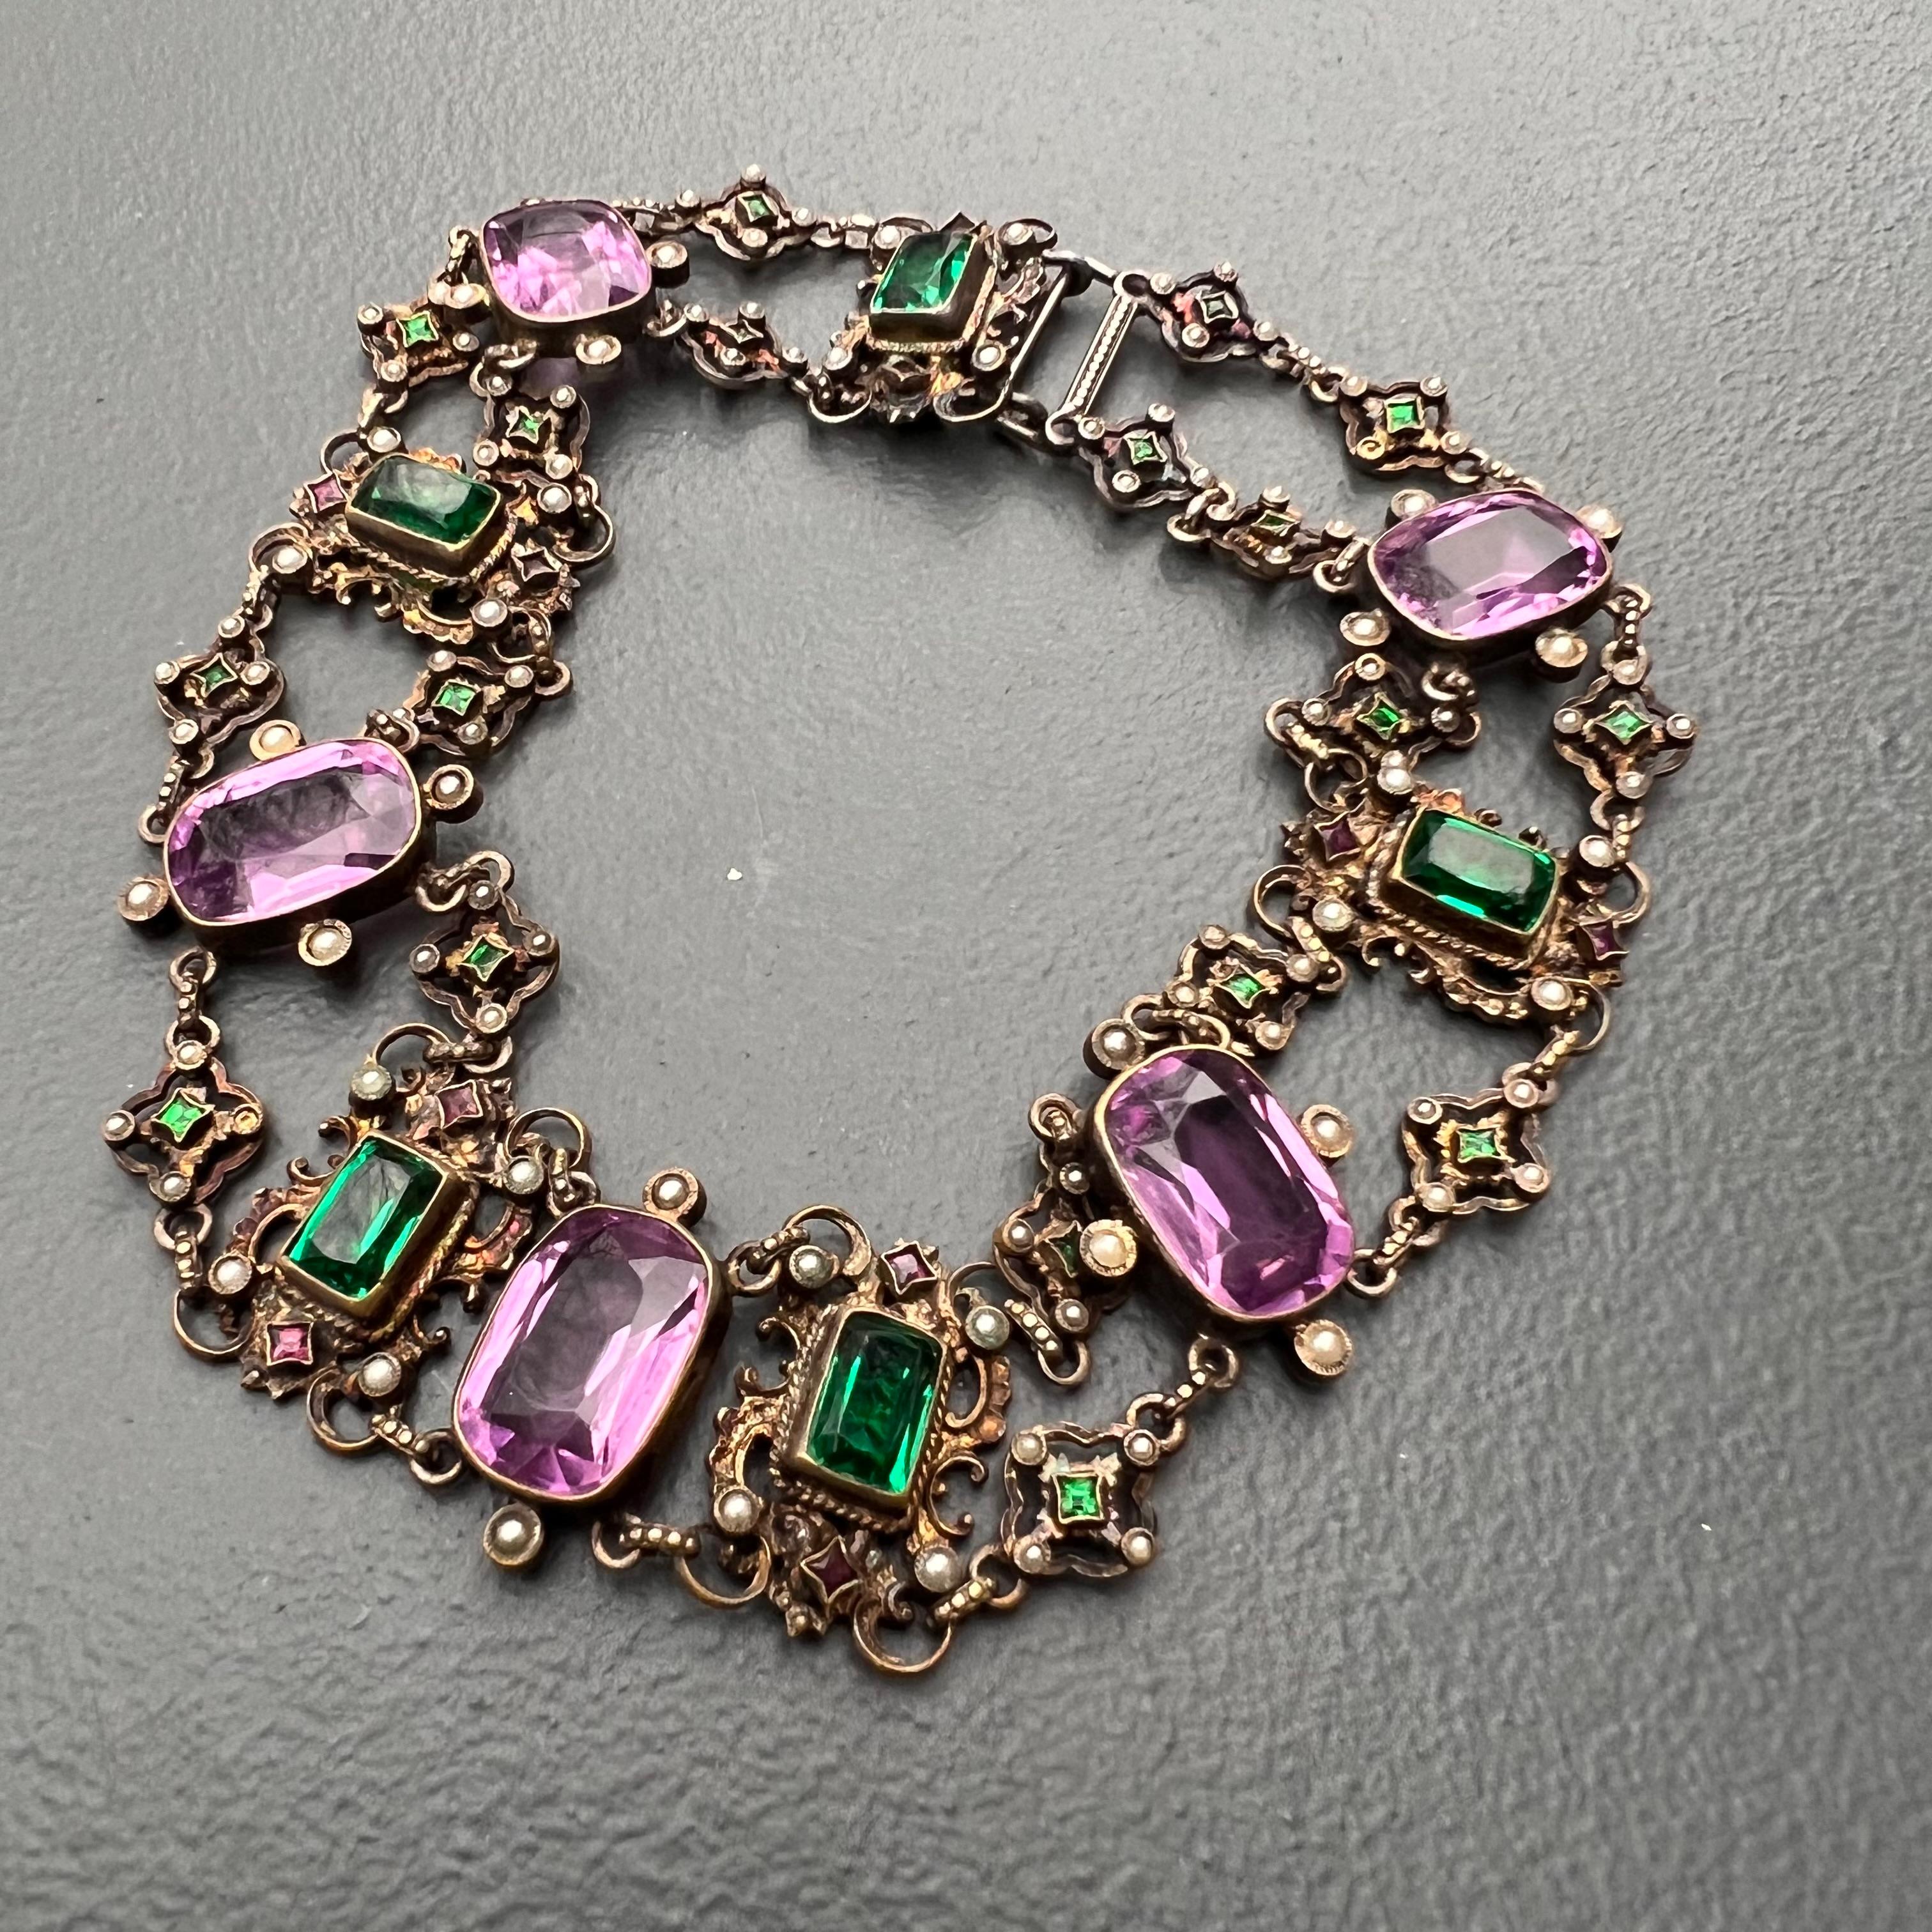 Antique 19th century Austro Hungarian gilt metal , paste /glass stones choker necklace with small faux pearls . Larger faceted amethyst glass stones are set on an open-back setting .

Necklace is for smaller neck length or add an velvet ribbon for